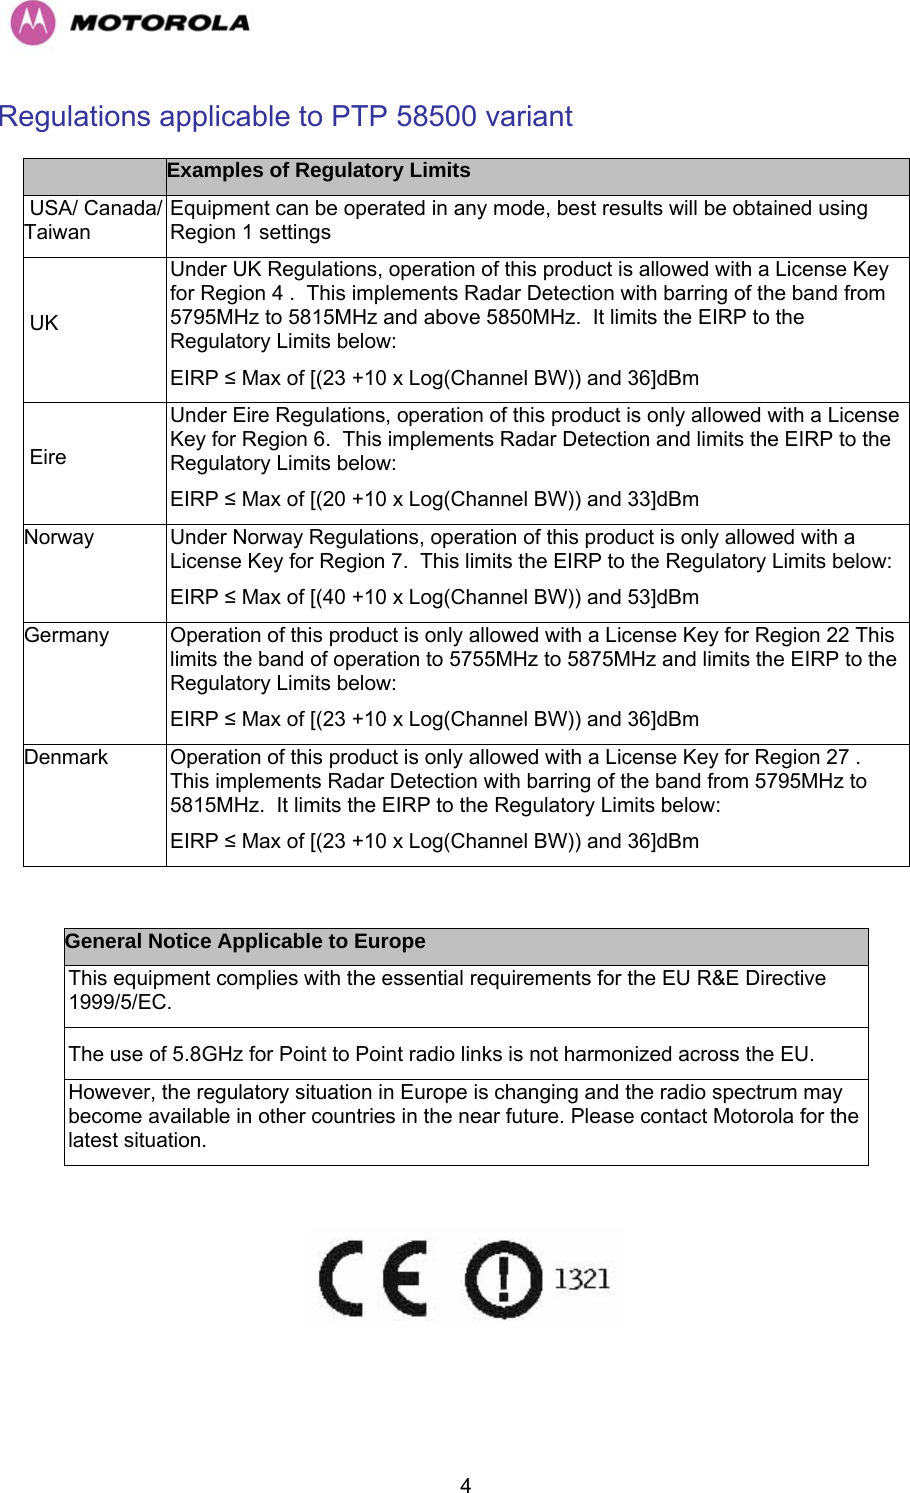   4Regulations applicable to PTP 58500 variant  Examples of Regulatory Limits  USA/ Canada/ Taiwan Equipment can be operated in any mode, best results will be obtained using Region 1 settings   UK Under UK Regulations, operation of this product is allowed with a License Key for Region 4 .  This implements Radar Detection with barring of the band from 5795MHz to 5815MHz and above 5850MHz.  It limits the EIRP to the Regulatory Limits below: EIRP ≤ Max of [(23 +10 x Log(Channel BW)) and 36]dBm  Eire Under Eire Regulations, operation of this product is only allowed with a License Key for Region 6.  This implements Radar Detection and limits the EIRP to the Regulatory Limits below: EIRP ≤ Max of [(20 +10 x Log(Channel BW)) and 33]dBm  Norway   Under Norway Regulations, operation of this product is only allowed with a License Key for Region 7.  This limits the EIRP to the Regulatory Limits below: EIRP ≤ Max of [(40 +10 x Log(Channel BW)) and 53]dBm  Germany   Operation of this product is only allowed with a License Key for Region 22 This limits the band of operation to 5755MHz to 5875MHz and limits the EIRP to the Regulatory Limits below: EIRP ≤ Max of [(23 +10 x Log(Channel BW)) and 36]dBm Denmark  Operation of this product is only allowed with a License Key for Region 27 .  This implements Radar Detection with barring of the band from 5795MHz to 5815MHz.  It limits the EIRP to the Regulatory Limits below: EIRP ≤ Max of [(23 +10 x Log(Channel BW)) and 36]dBm  General Notice Applicable to Europe This equipment complies with the essential requirements for the EU R&amp;E Directive 1999/5/EC. The use of 5.8GHz for Point to Point radio links is not harmonized across the EU. However, the regulatory situation in Europe is changing and the radio spectrum may become available in other countries in the near future. Please contact Motorola for the latest situation.   